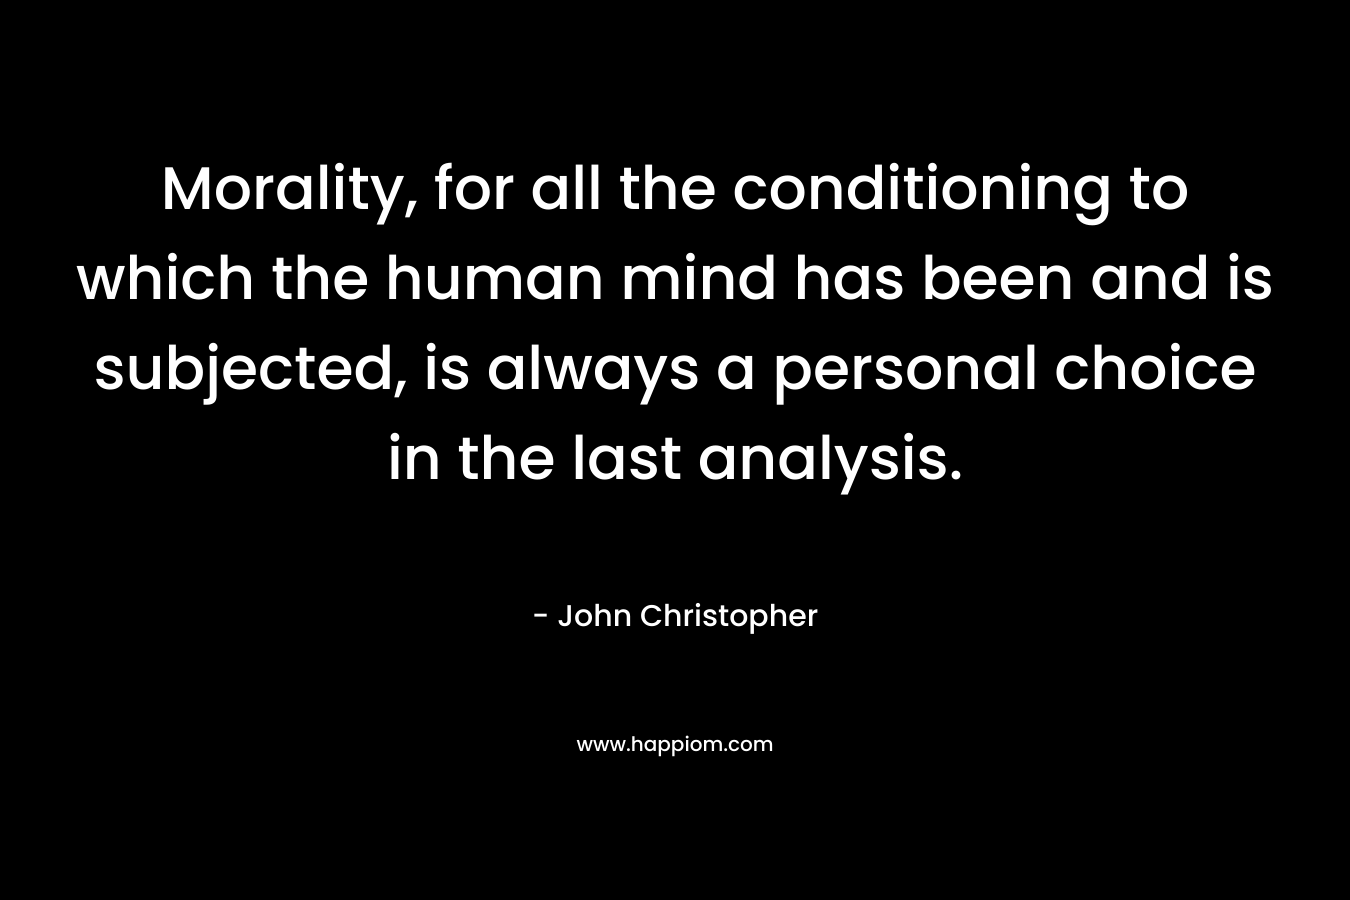 Morality, for all the conditioning to which the human mind has been and is subjected, is always a personal choice in the last analysis. – John Christopher